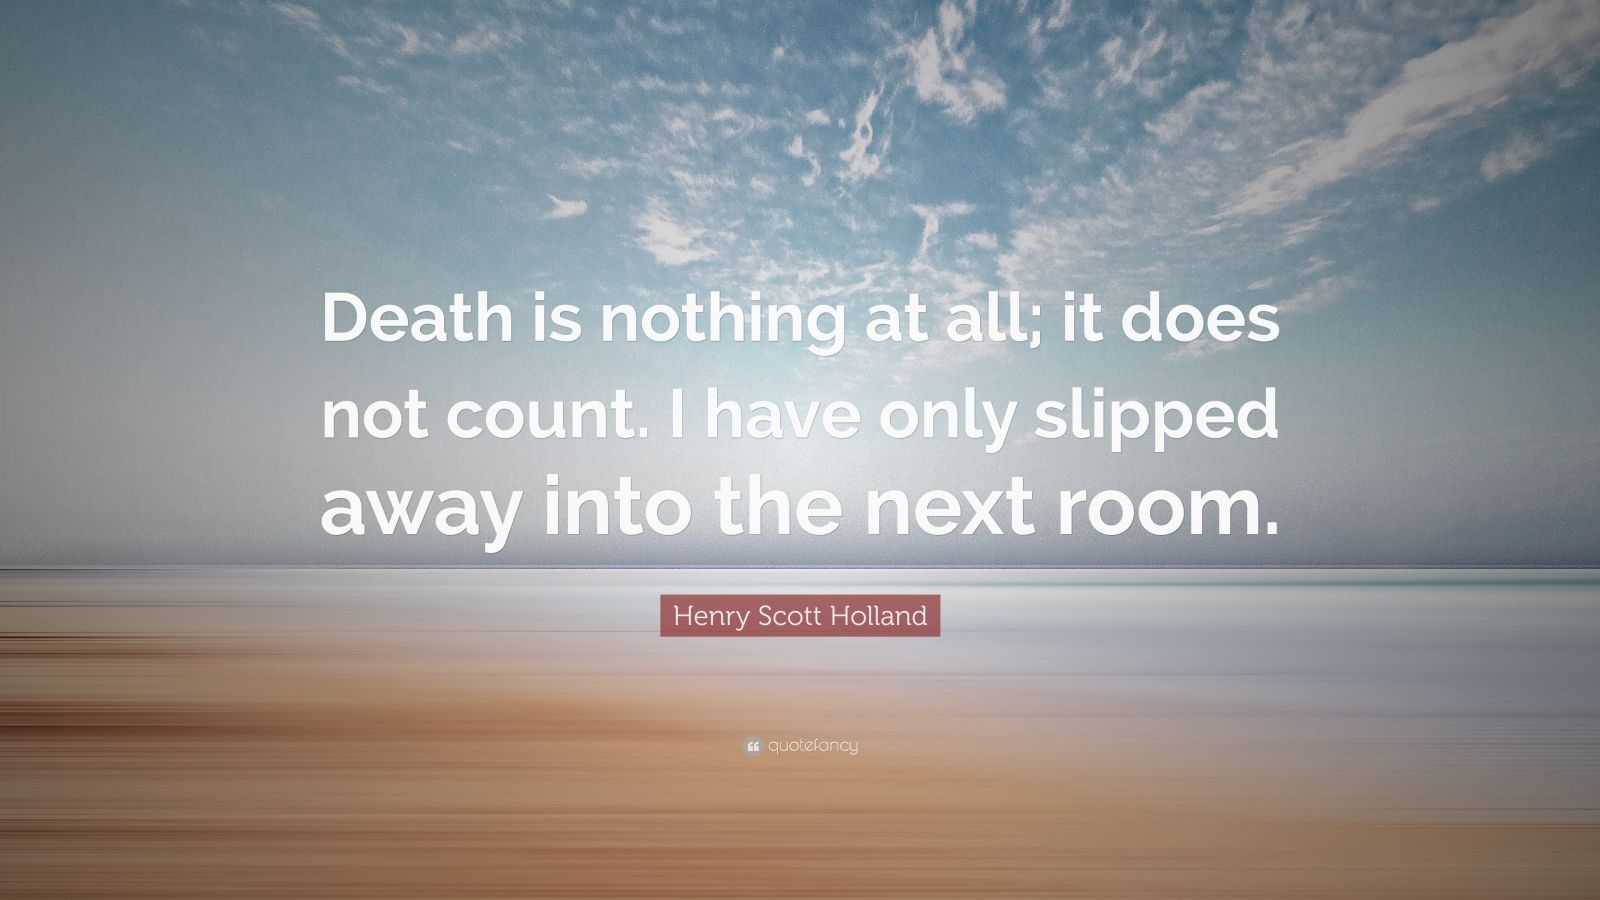 Henry Scott Holland Quote “Death is nothing at all; it does not count